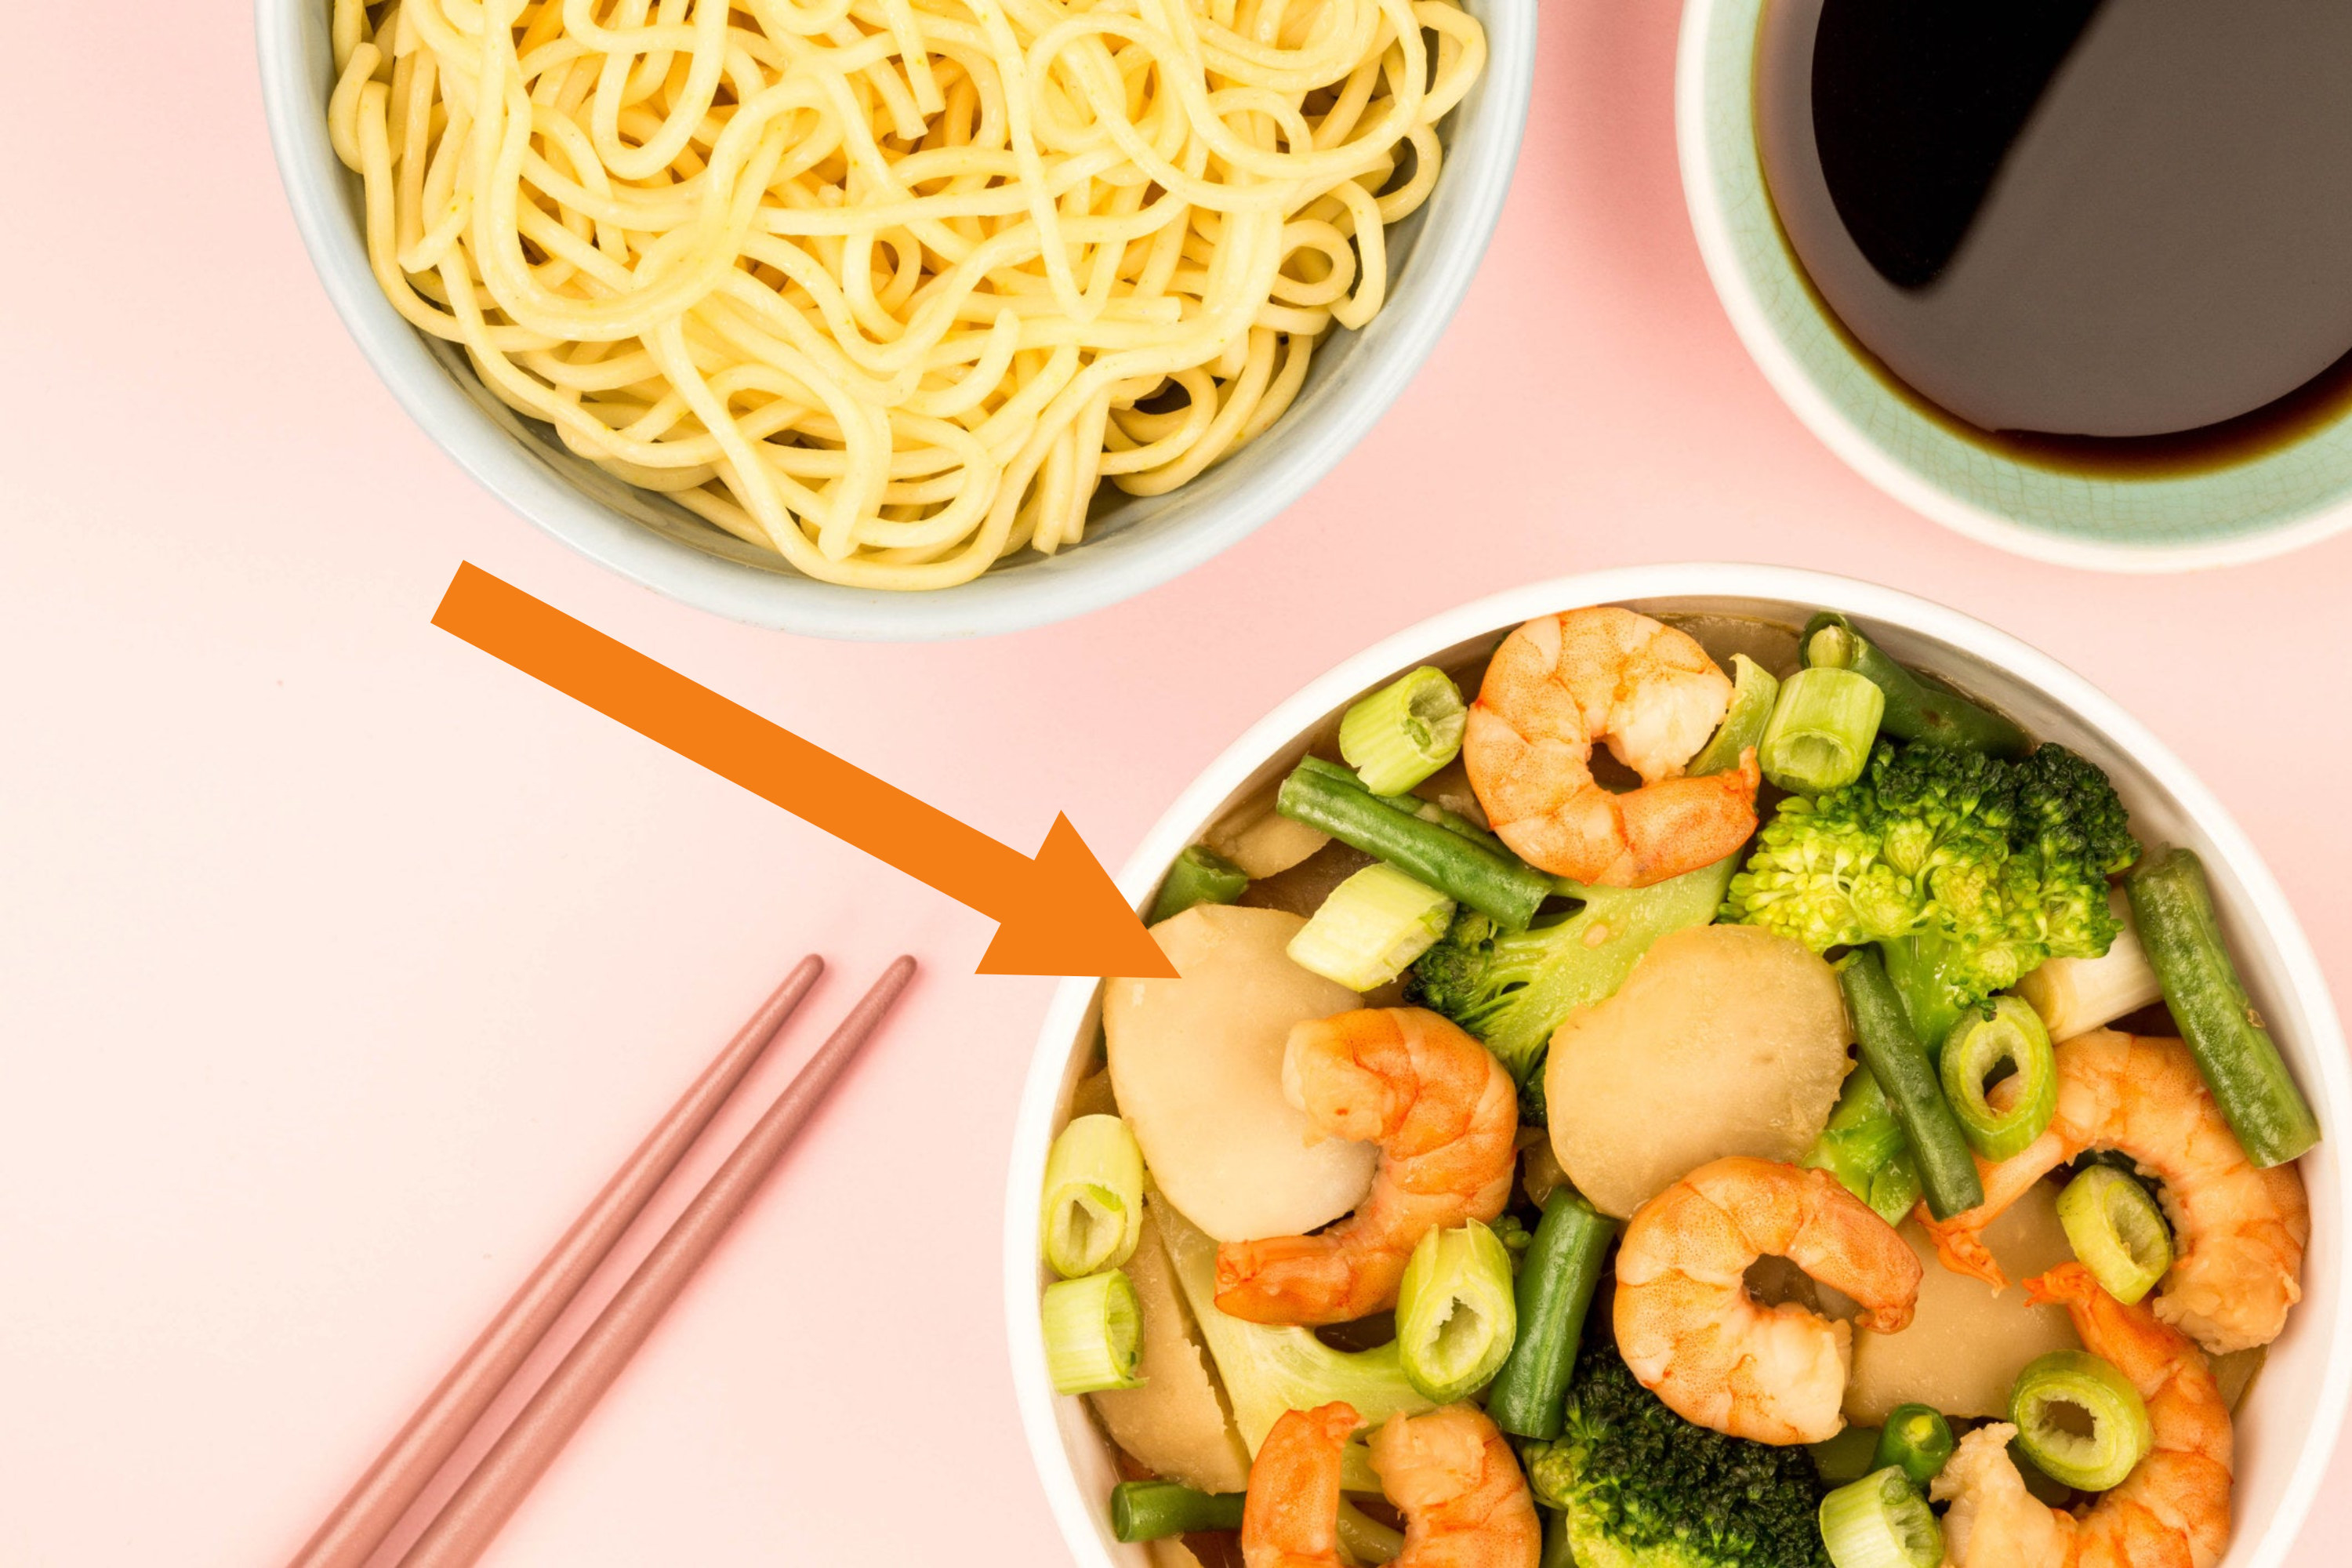 Noodles and prawns with broccoli and water chestnuts.